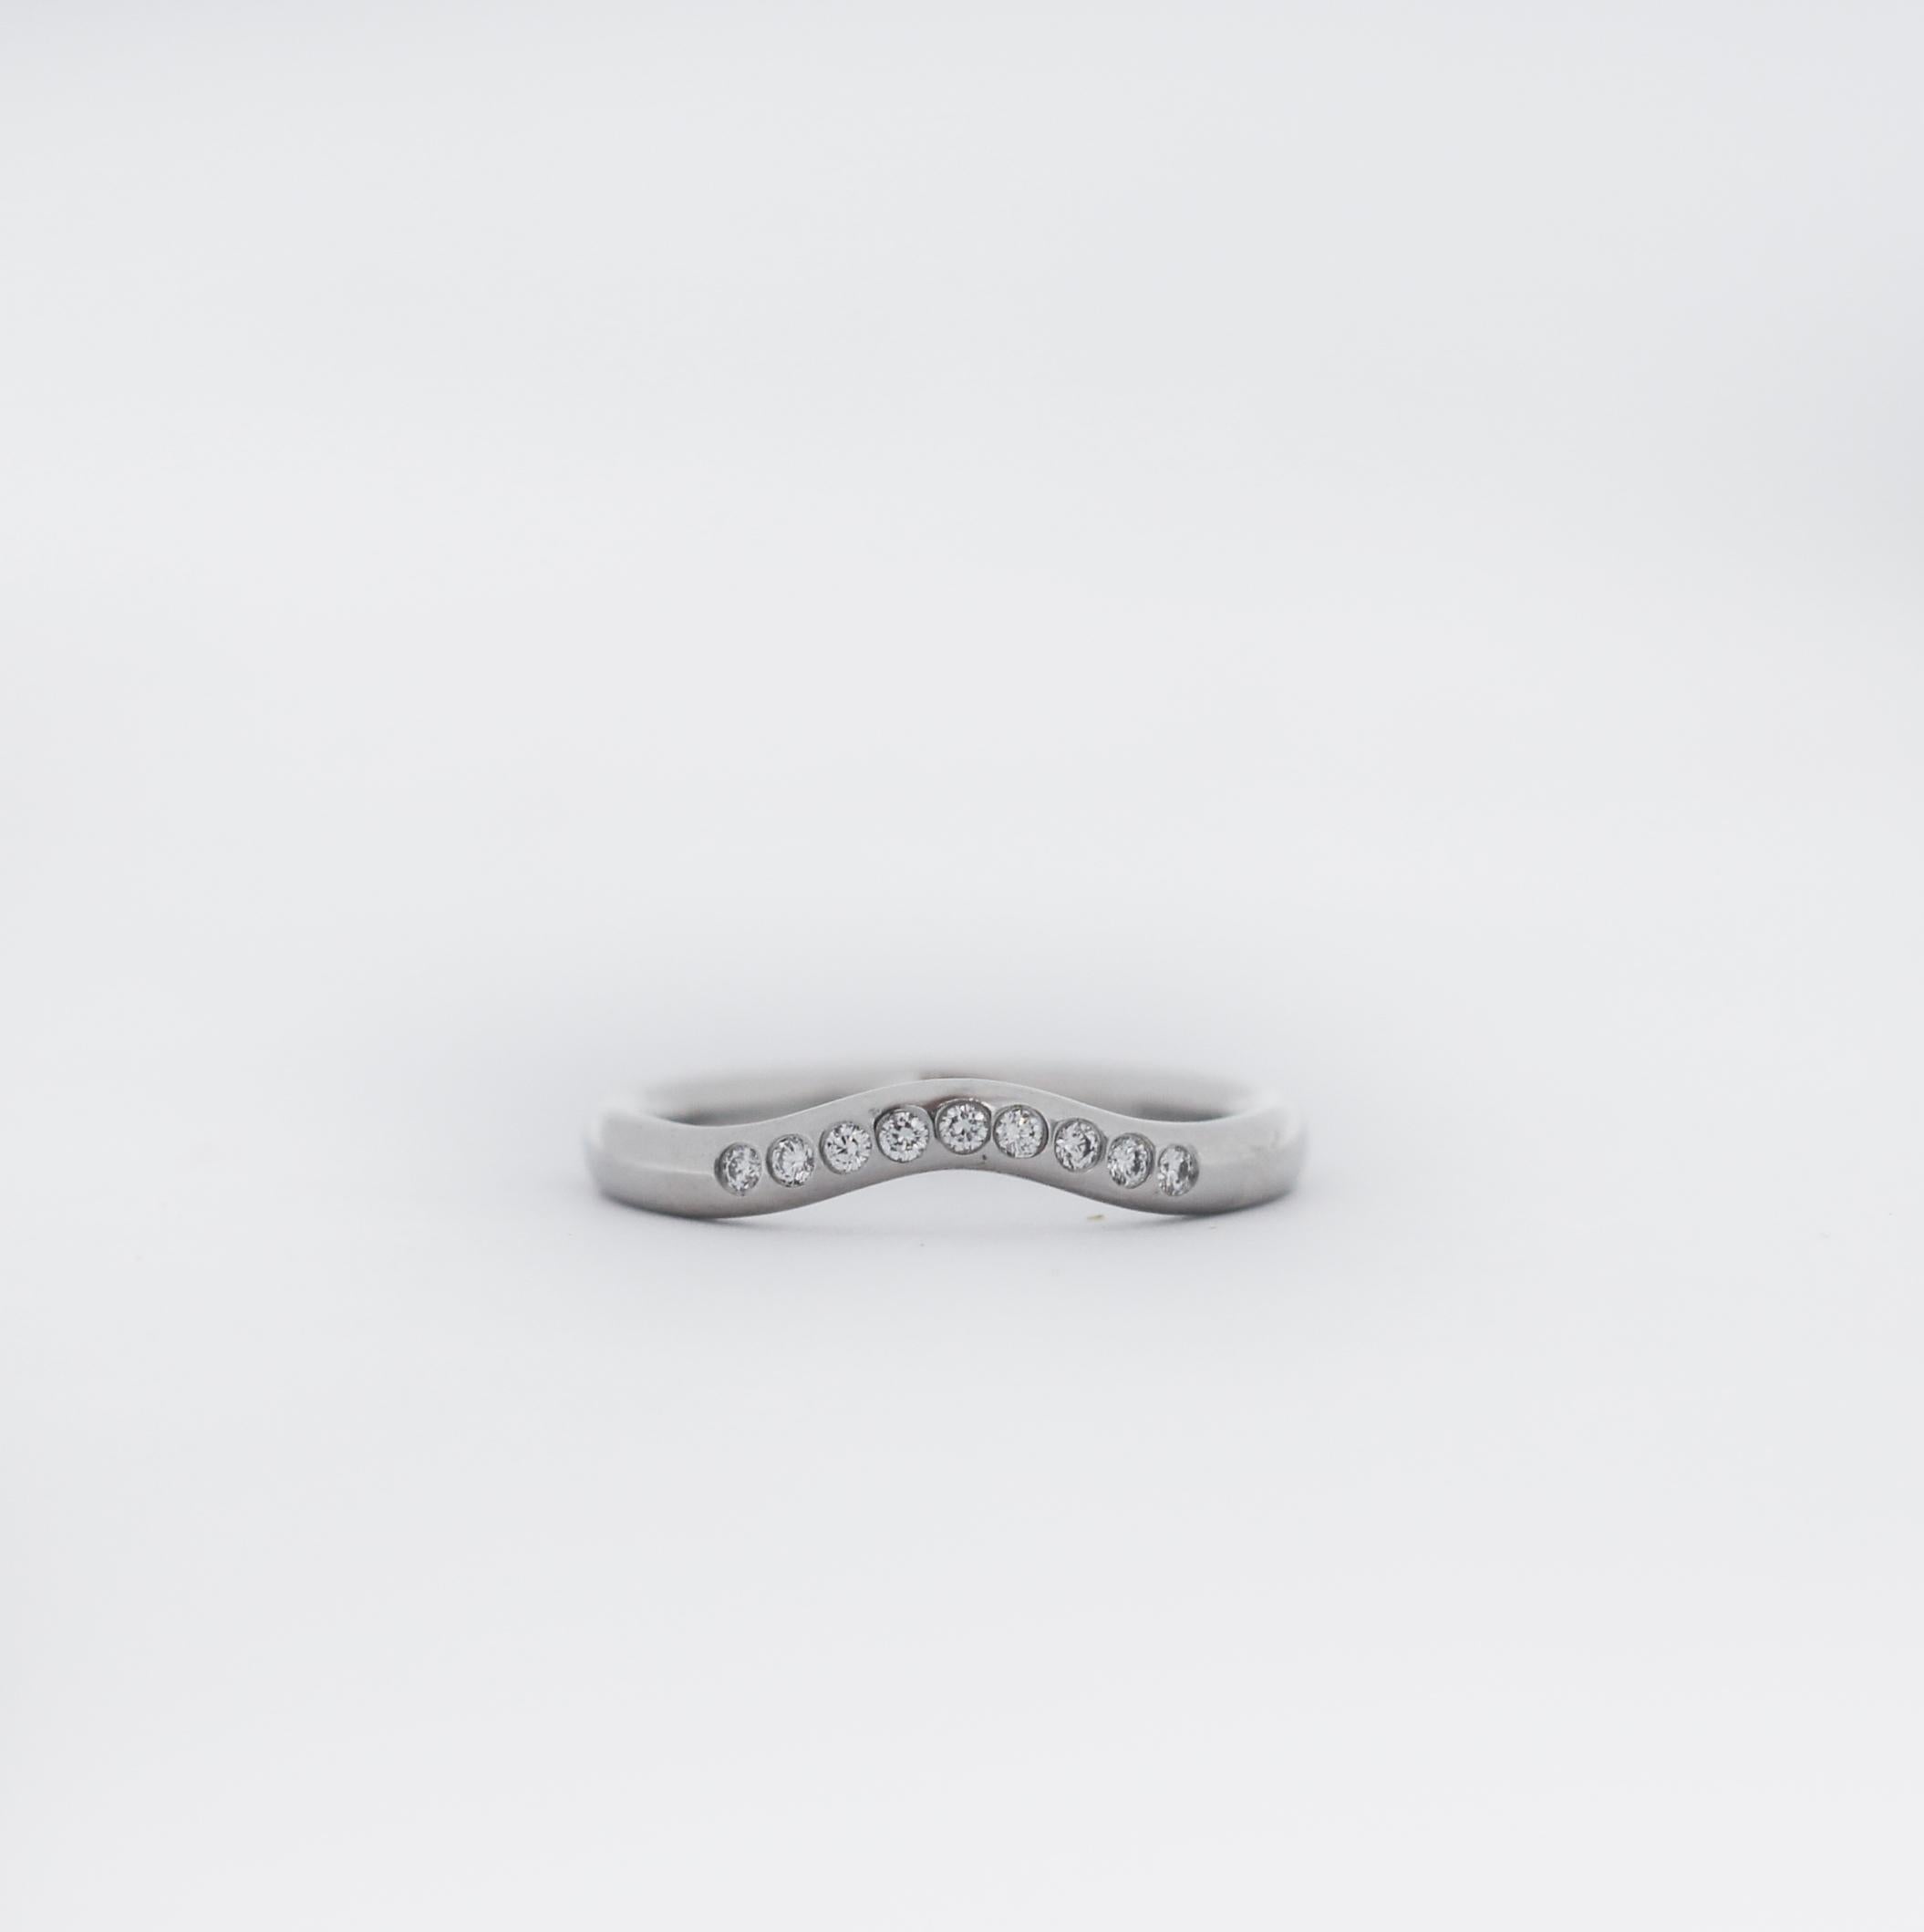 TIFFANY & CO.
Description & Details
Round brilliant diamonds add sparkle to Peretti's sculptural design.
Curved wedding band ring with diamonds in platinum.
Original designs copyrighted by Elsa Peretti.
Ring Size: 4.5
Weight: 3.5 grams
This